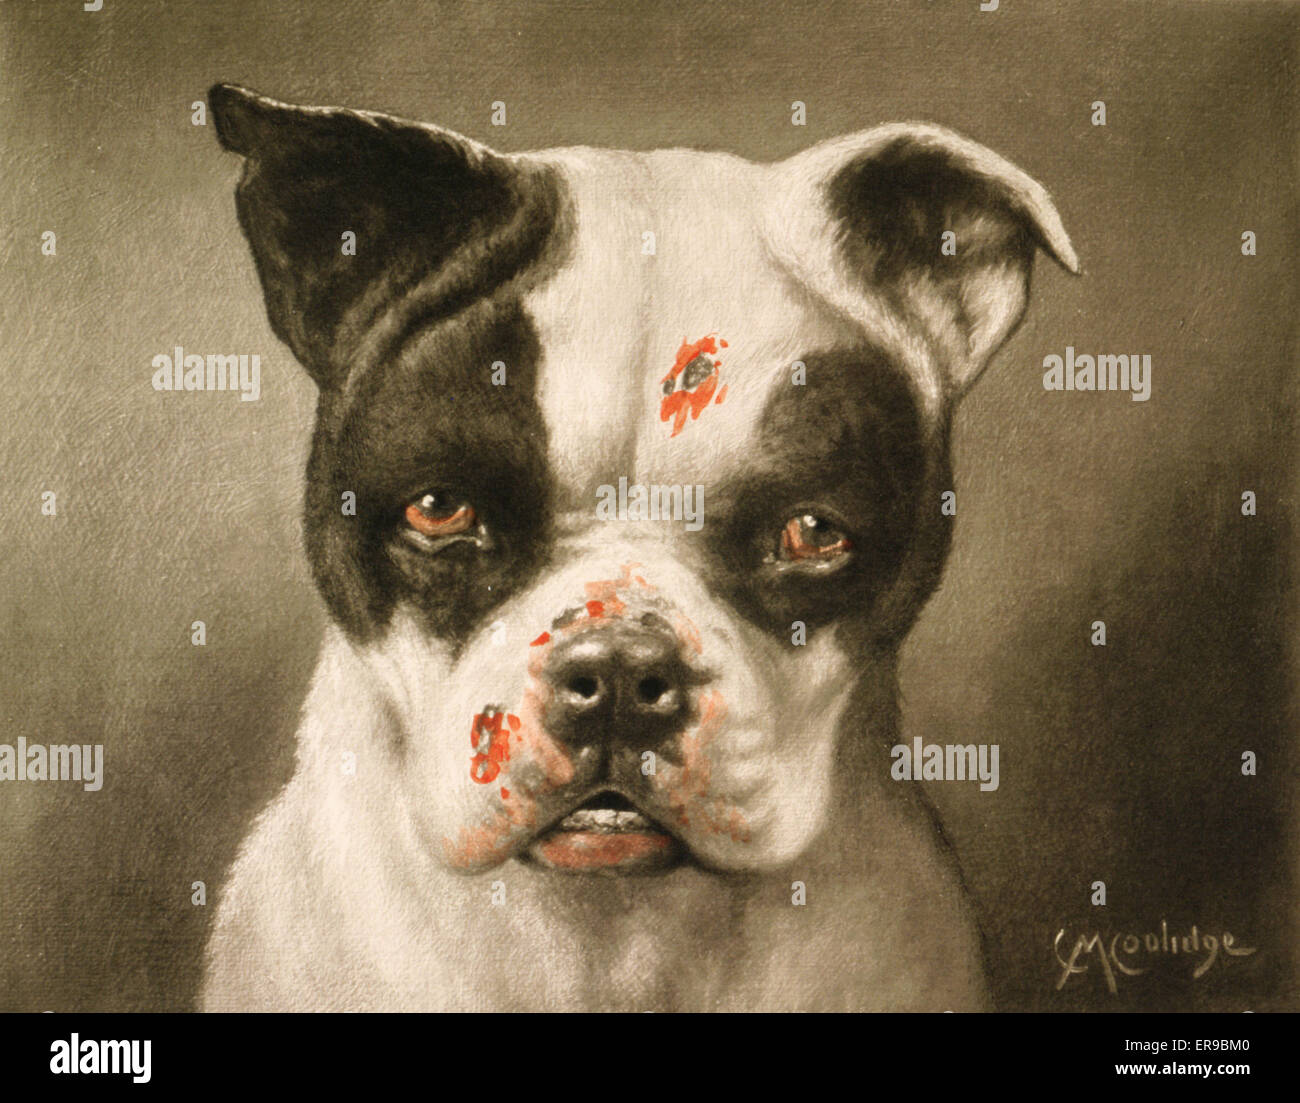 Boston Terrier. I'm a bad dog! What kind of a dog are you? Stock Photo